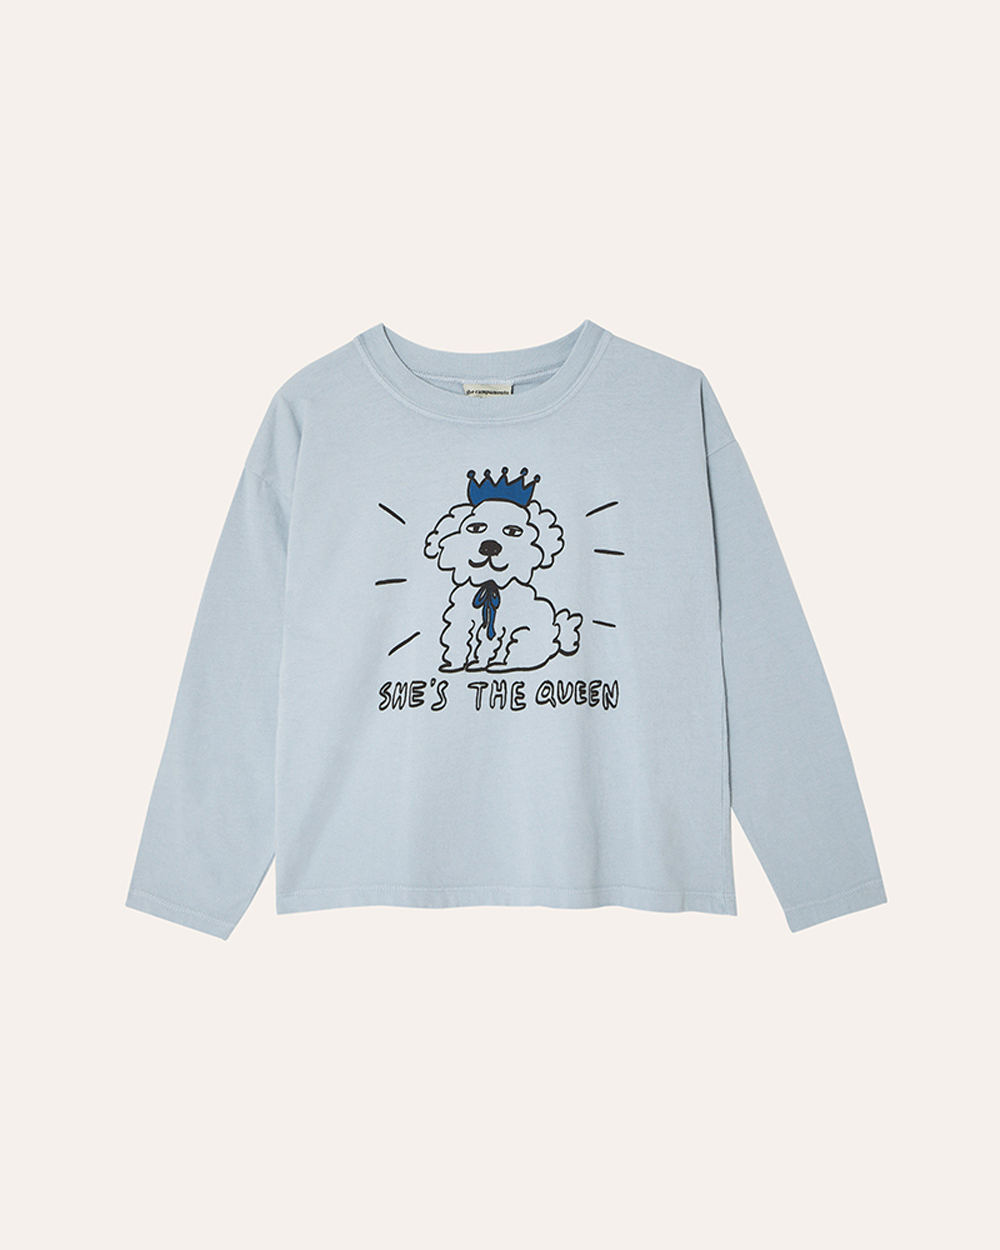 [ THE CAMPAMENTO ] THE QUEEN LONG SLEEVES KIDS TSHIRT [5-6Y]